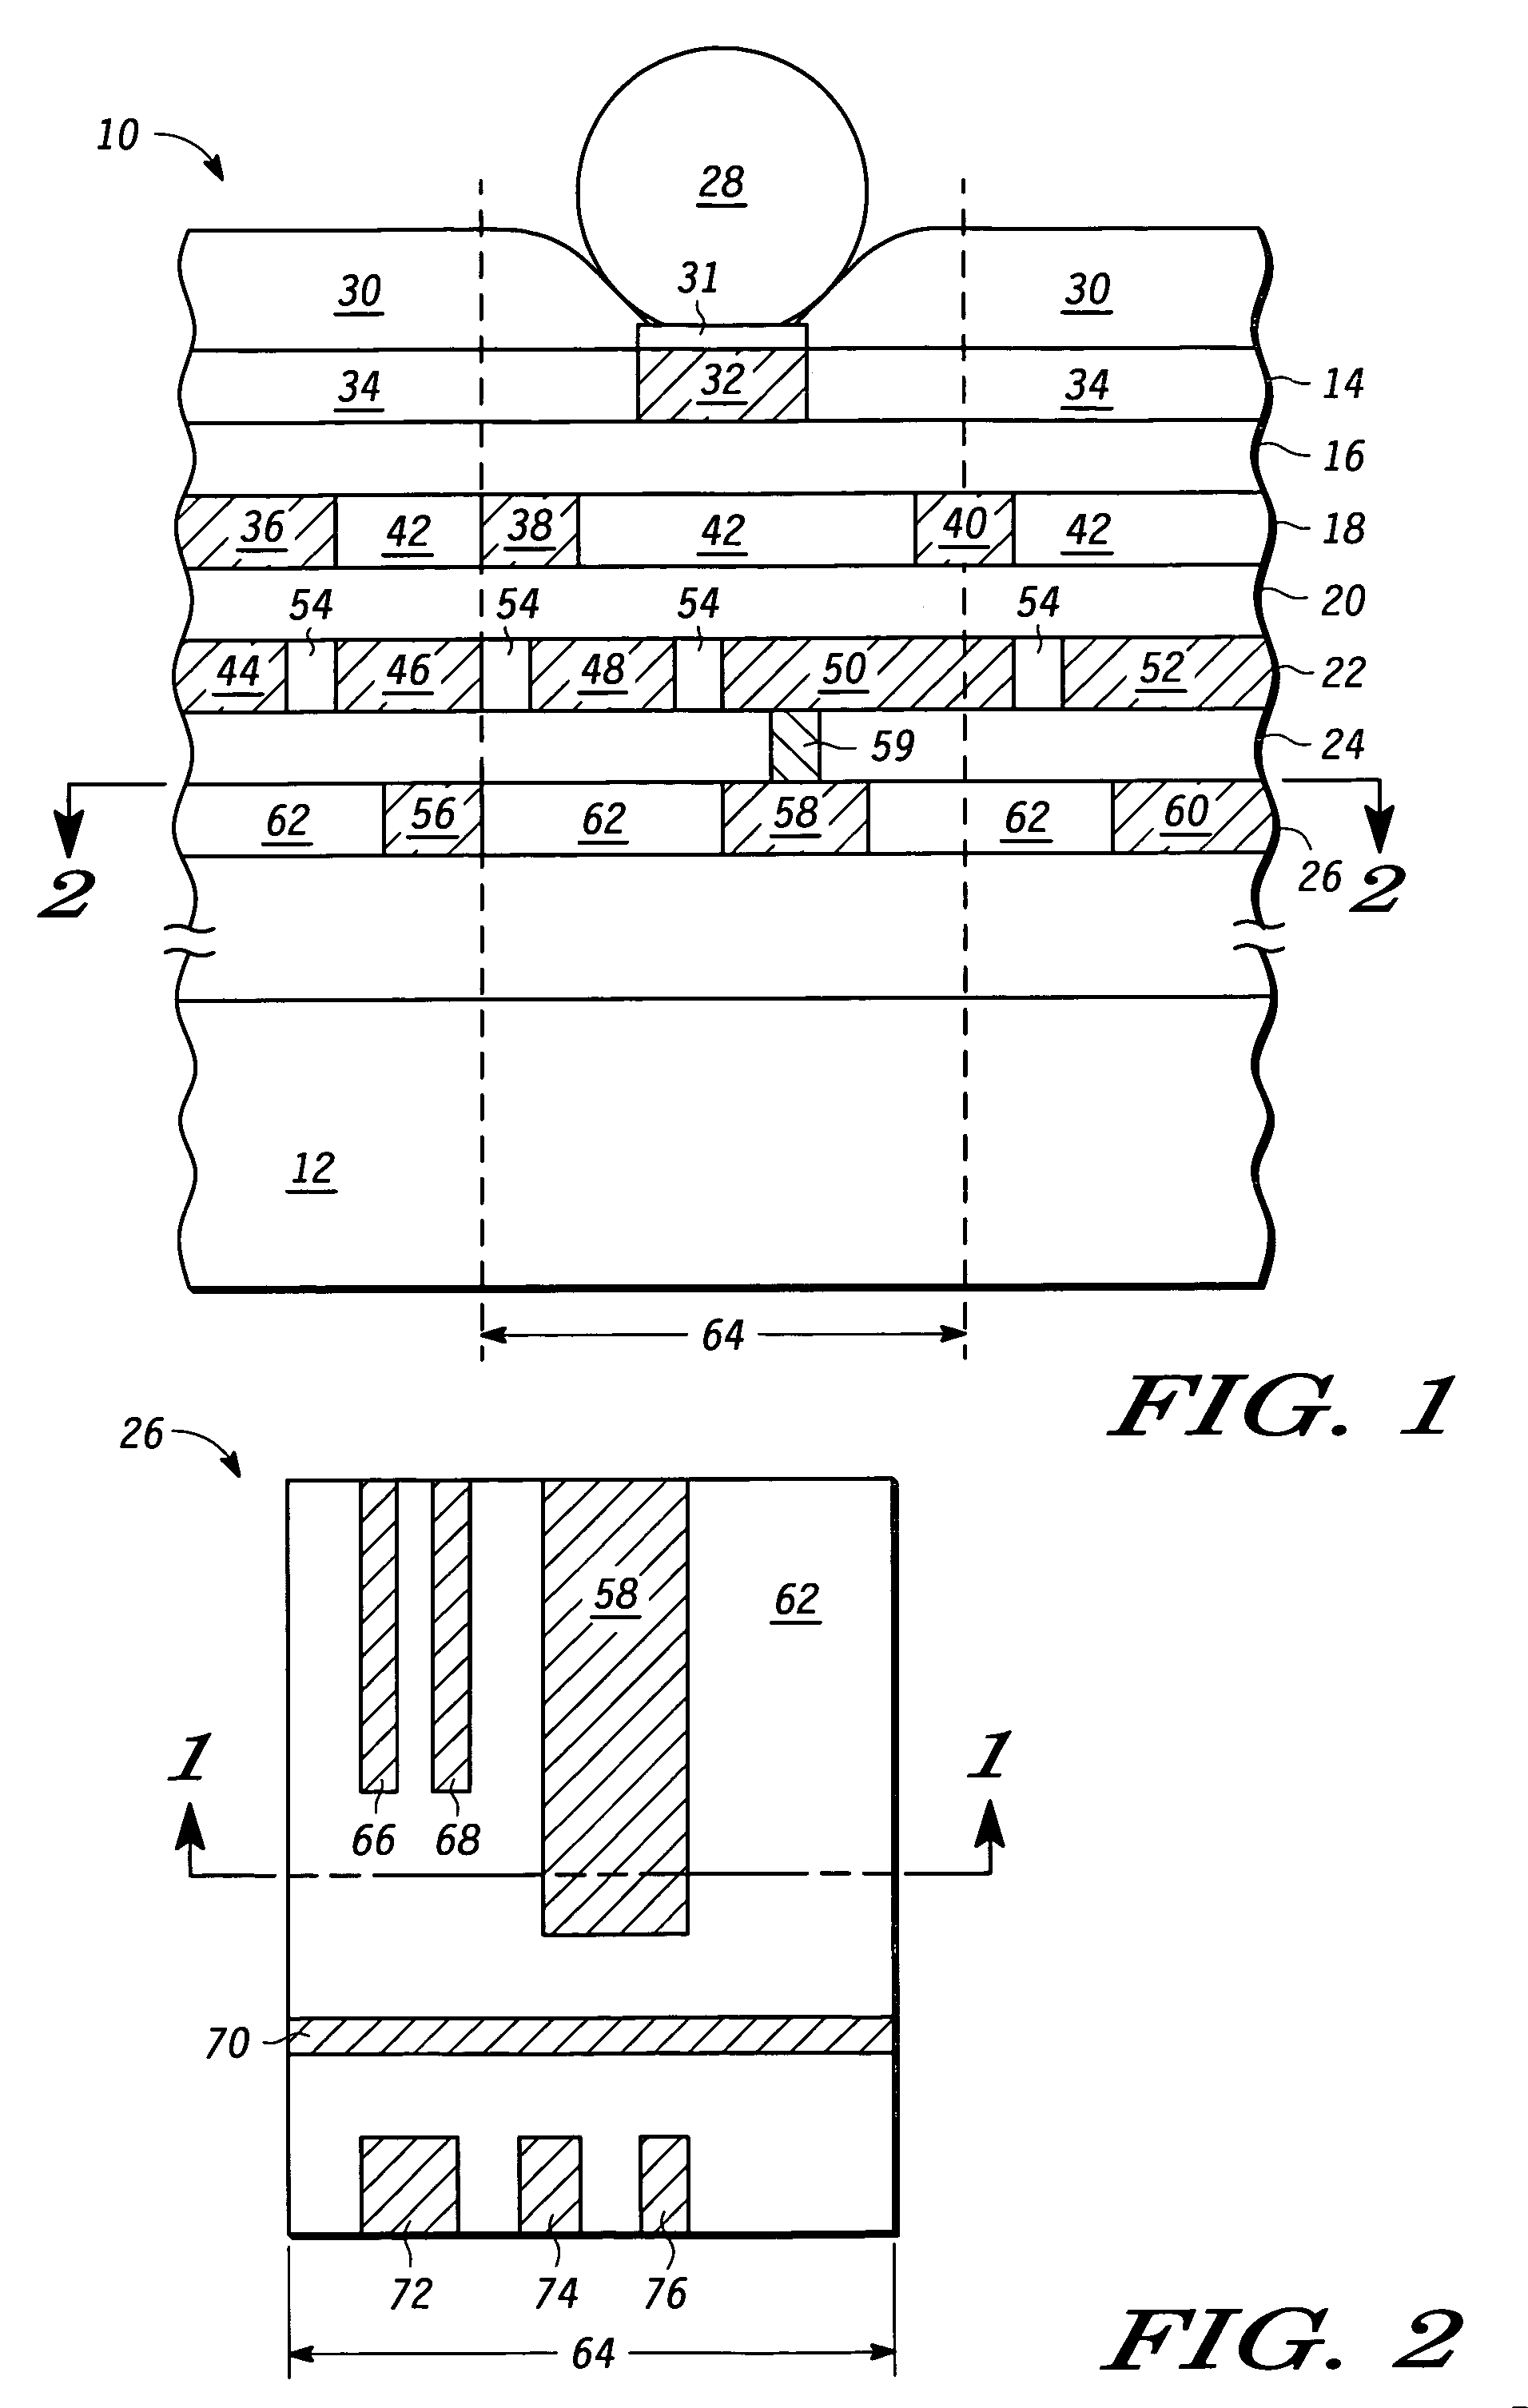 Integrated circuit having structural support for a flip-chip interconnect pad and method therefor